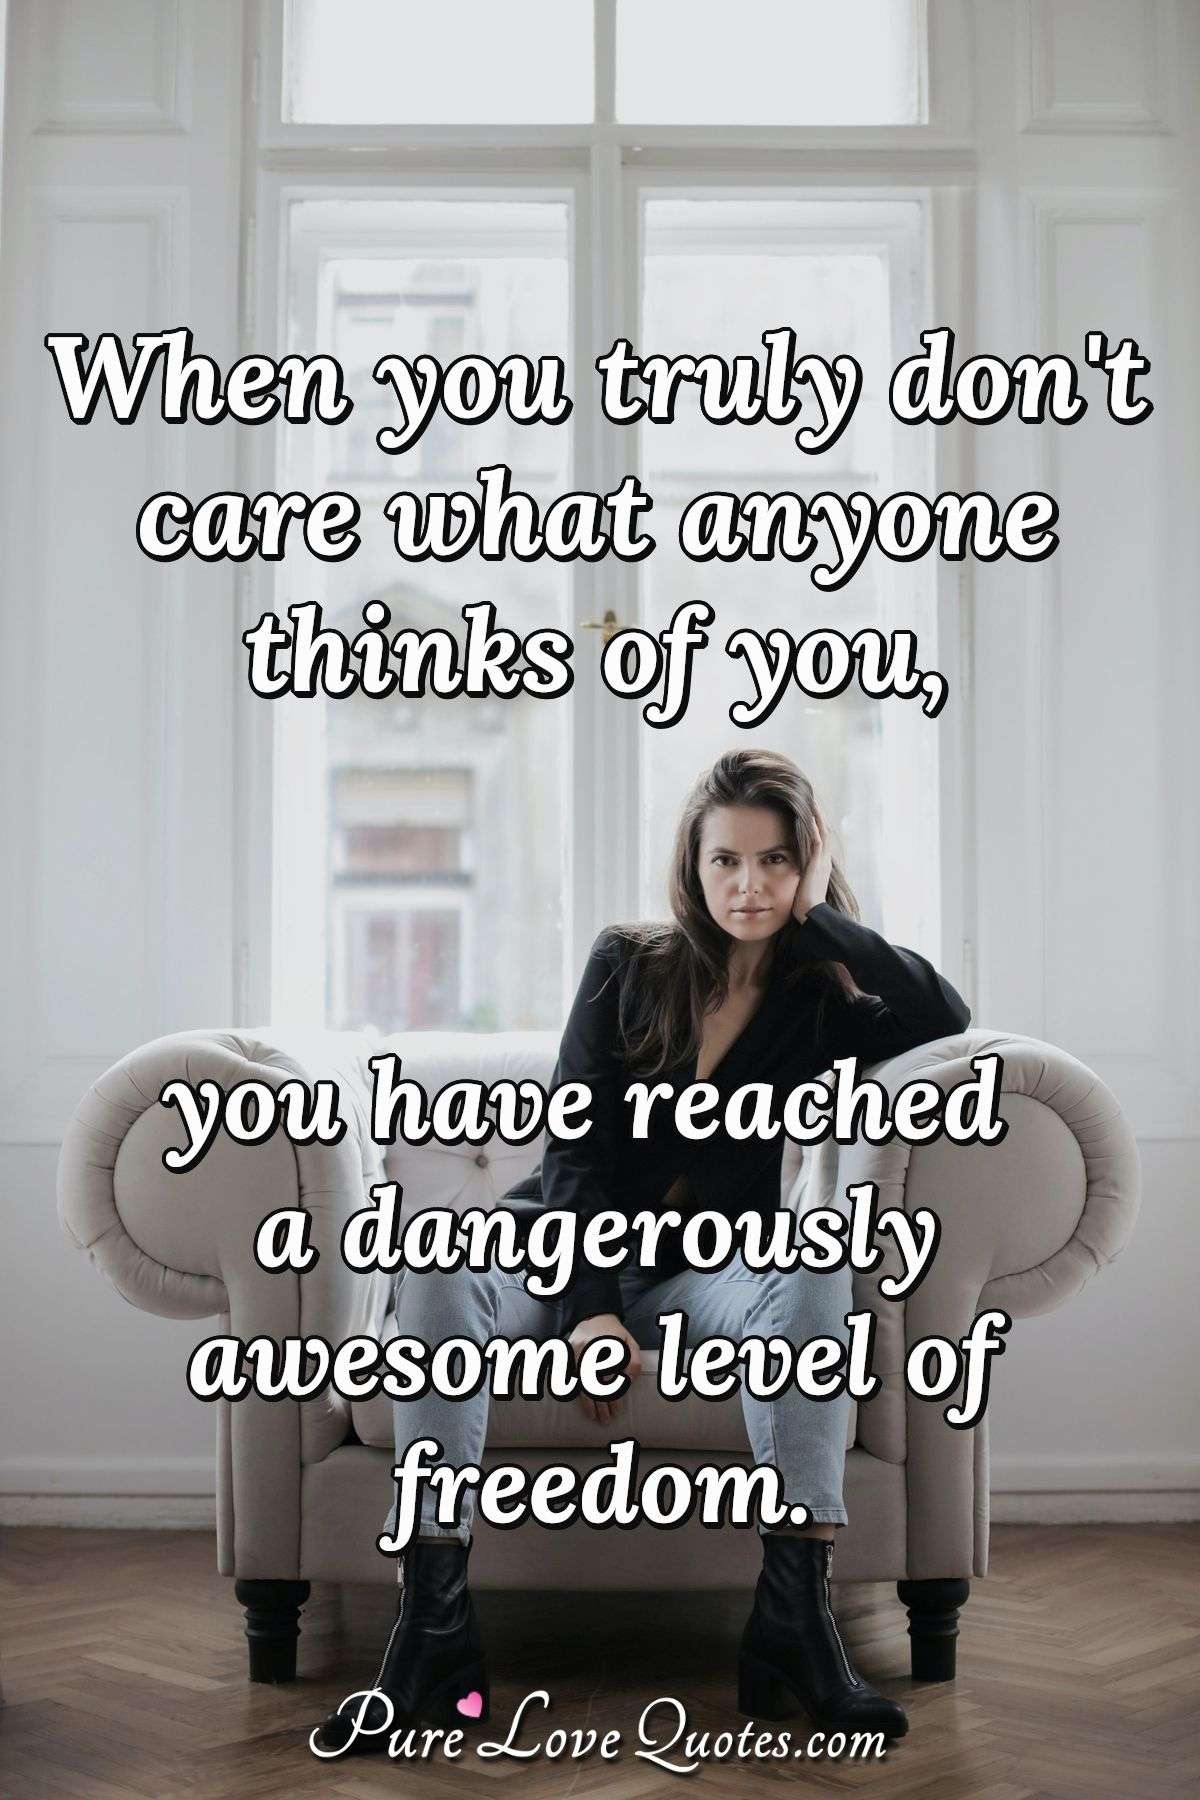 When you truly don't care what anyone thinks of you, you have reached a dangerously awesome level of freedom. - Anonymous